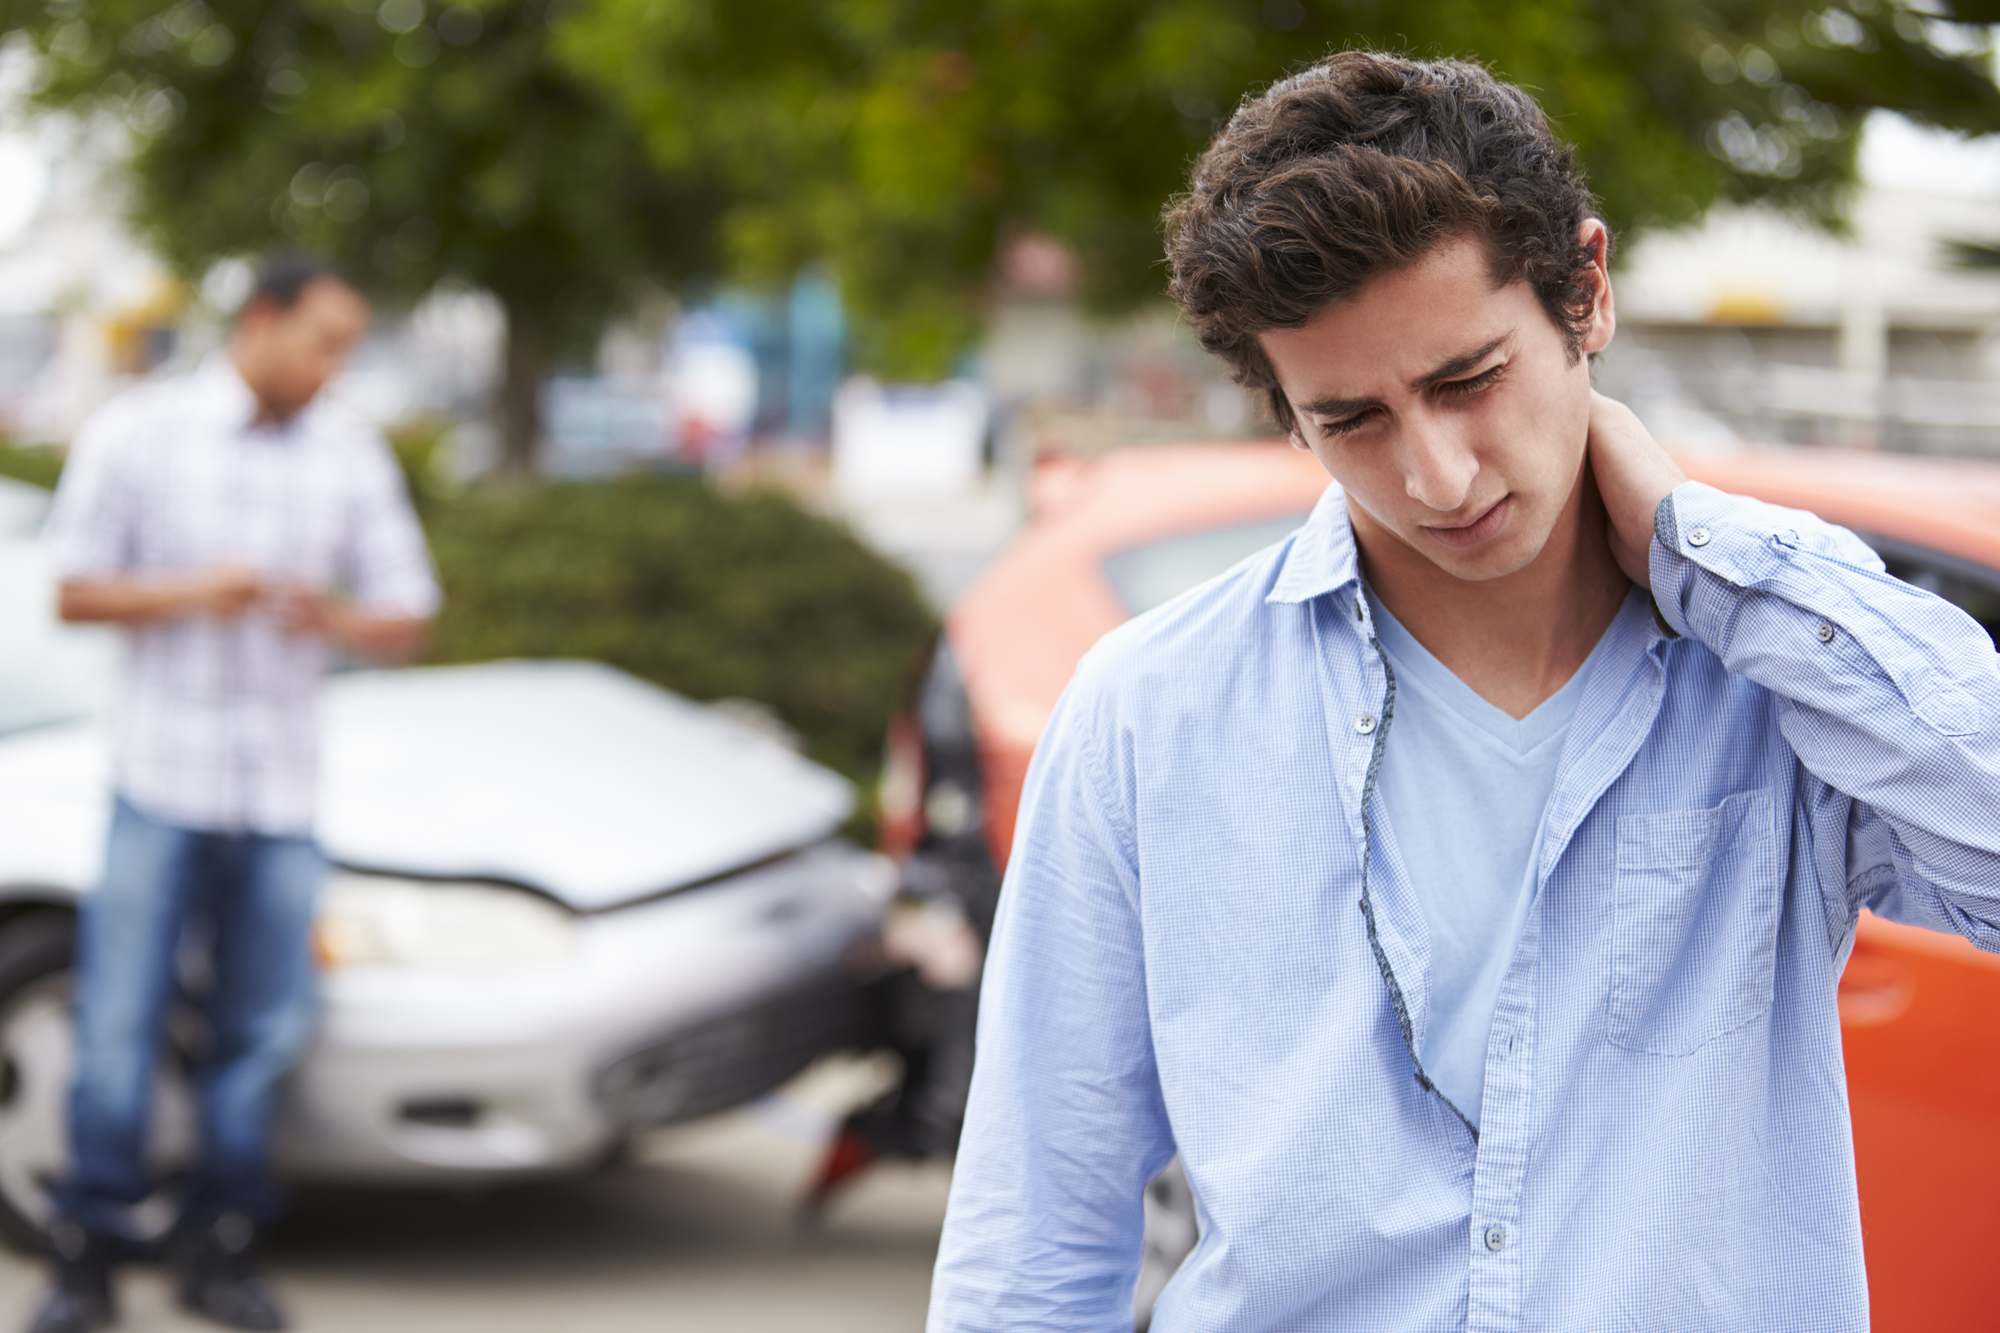 How Do I Pay Personal Injury Attorney Fees When I Can’t Afford Them?